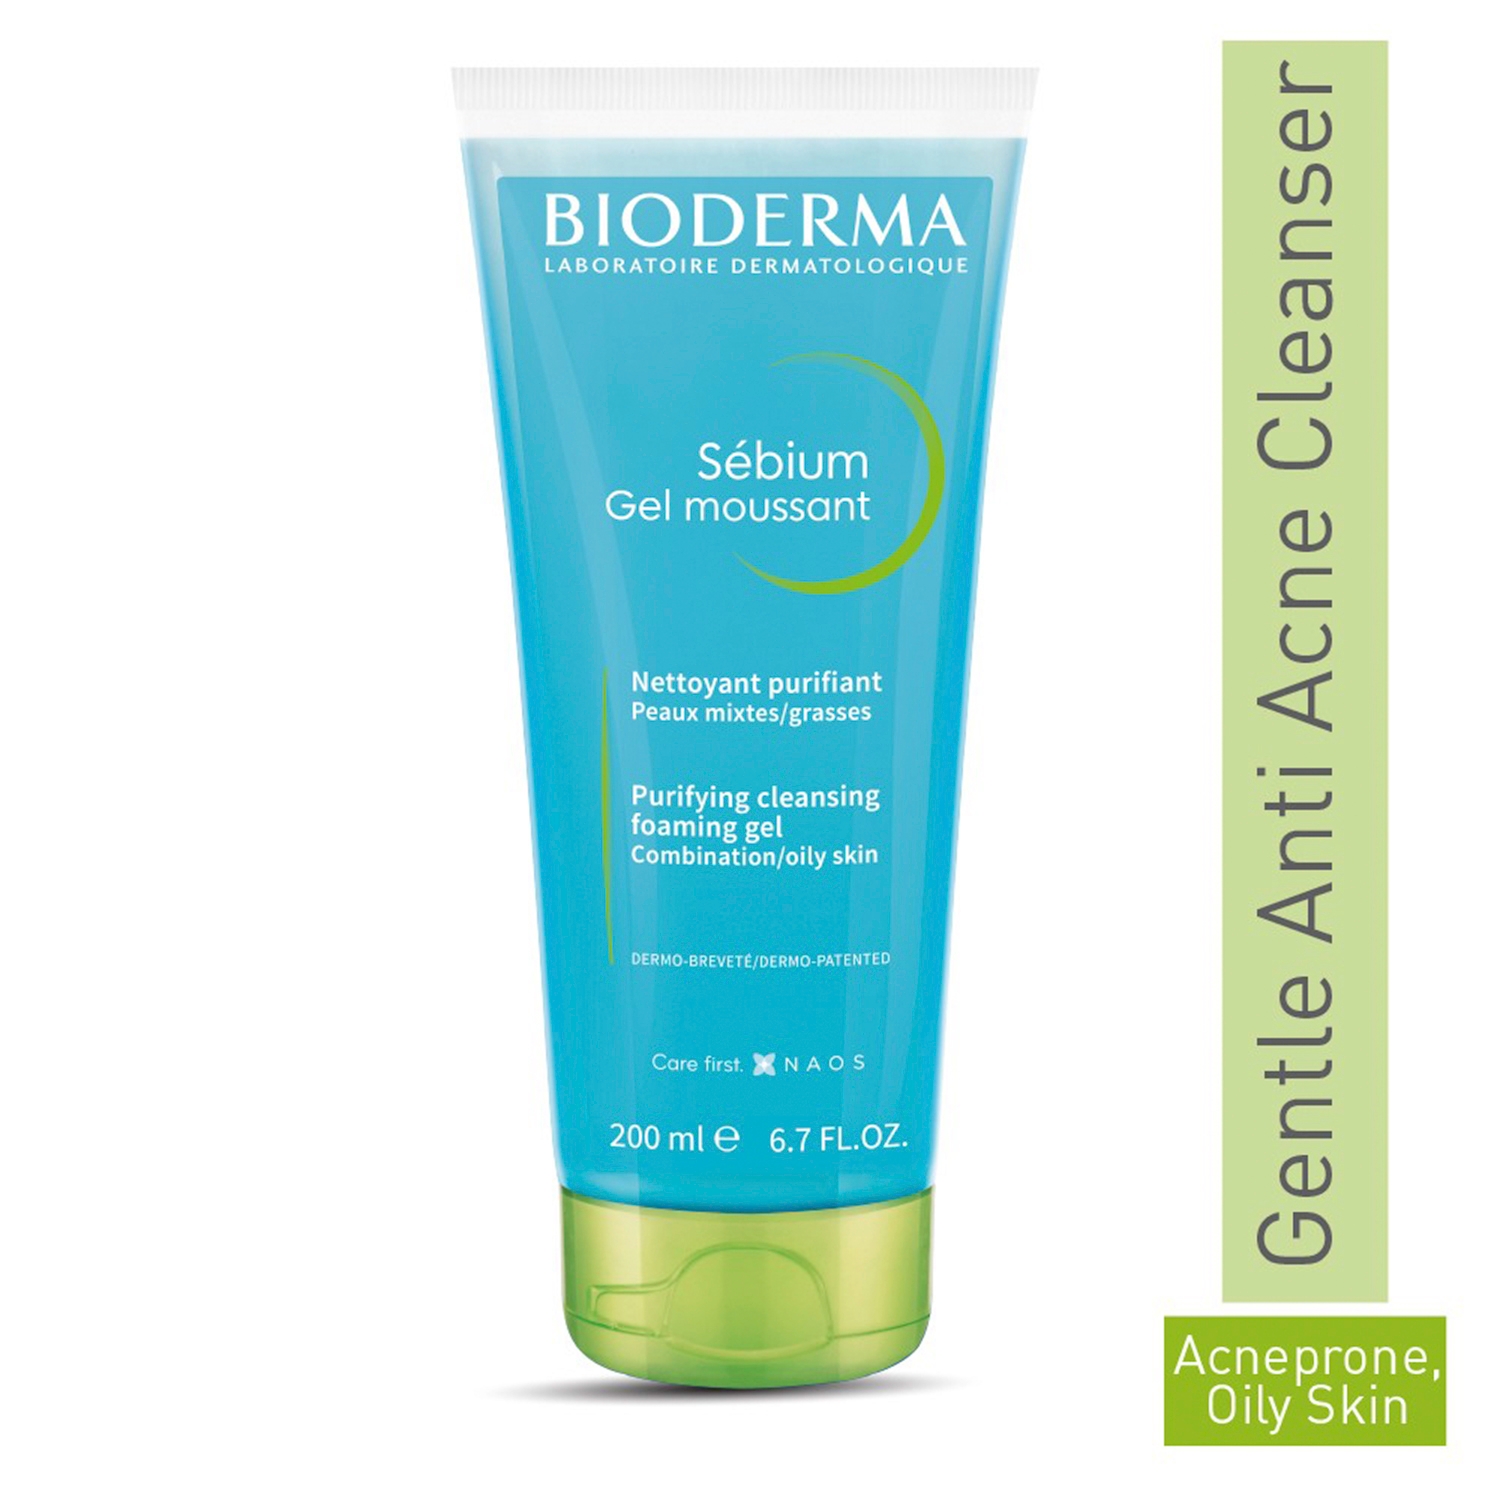 Bioderma | Bioderma Sebium Face And Body Wash Moussant Purifying Cleansing Gel (200ml)